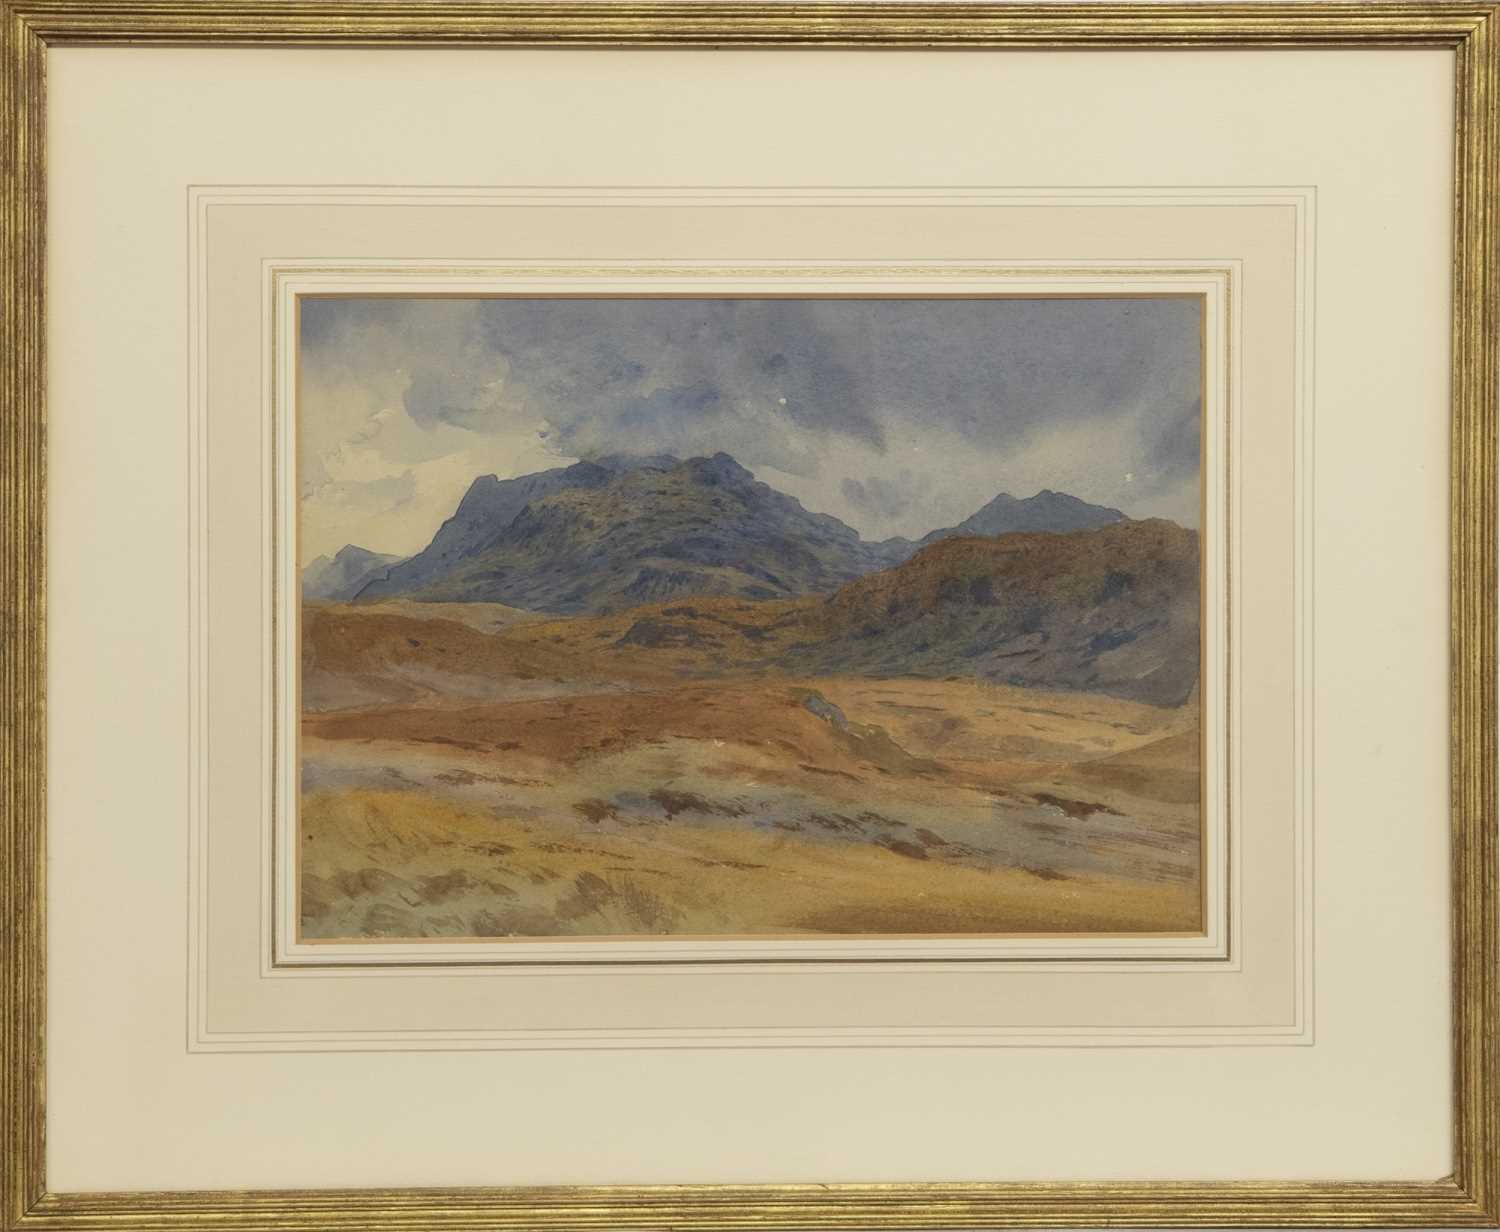 Lot 381 - STALKING COUNTRY, NEAR INVERARN, ROSS-SHIRE, A WATERCOLOUR BY ARCHIBALD THORBURN